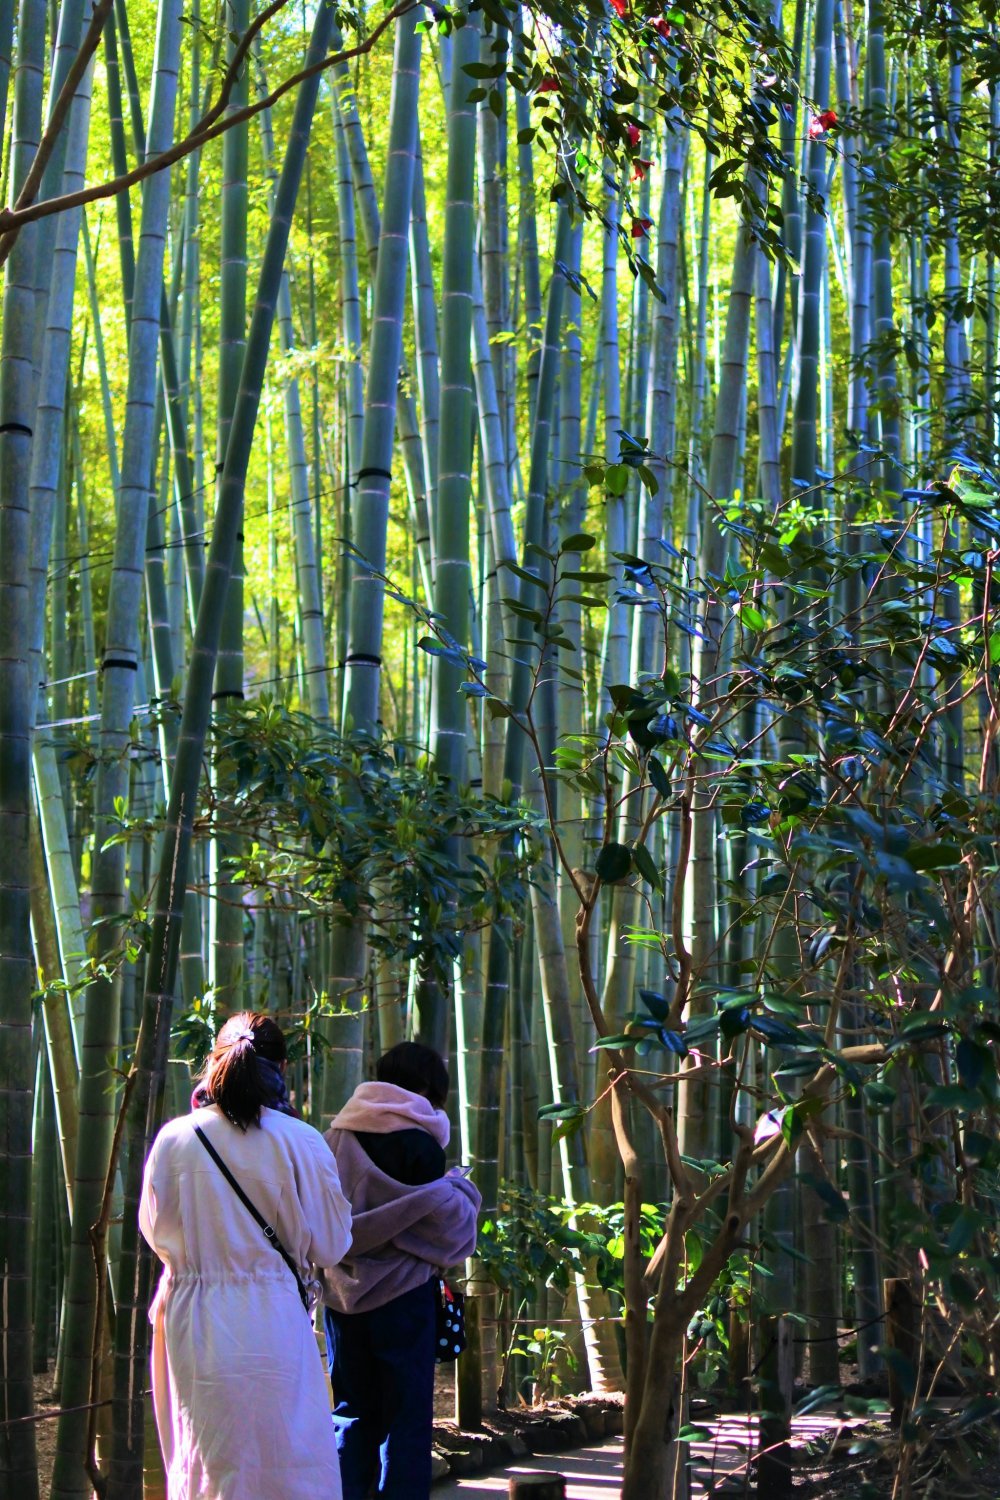 Another view of the scenery of the bamboo grove